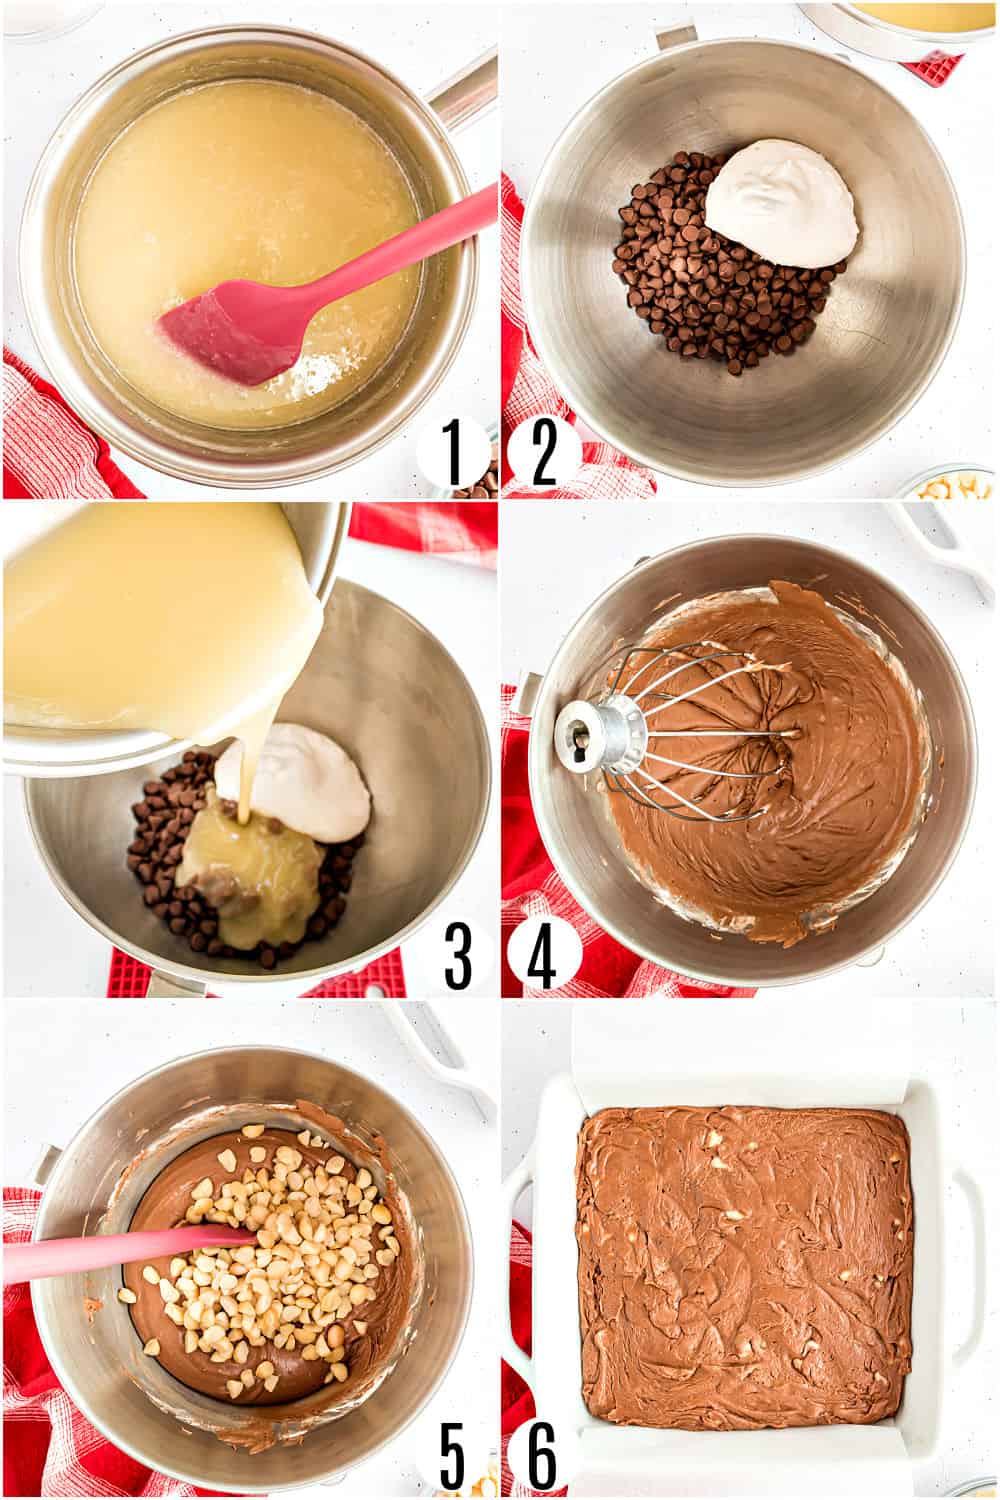 Step by step photos showing how to make macadamia nut fudge without a candy thermometer.